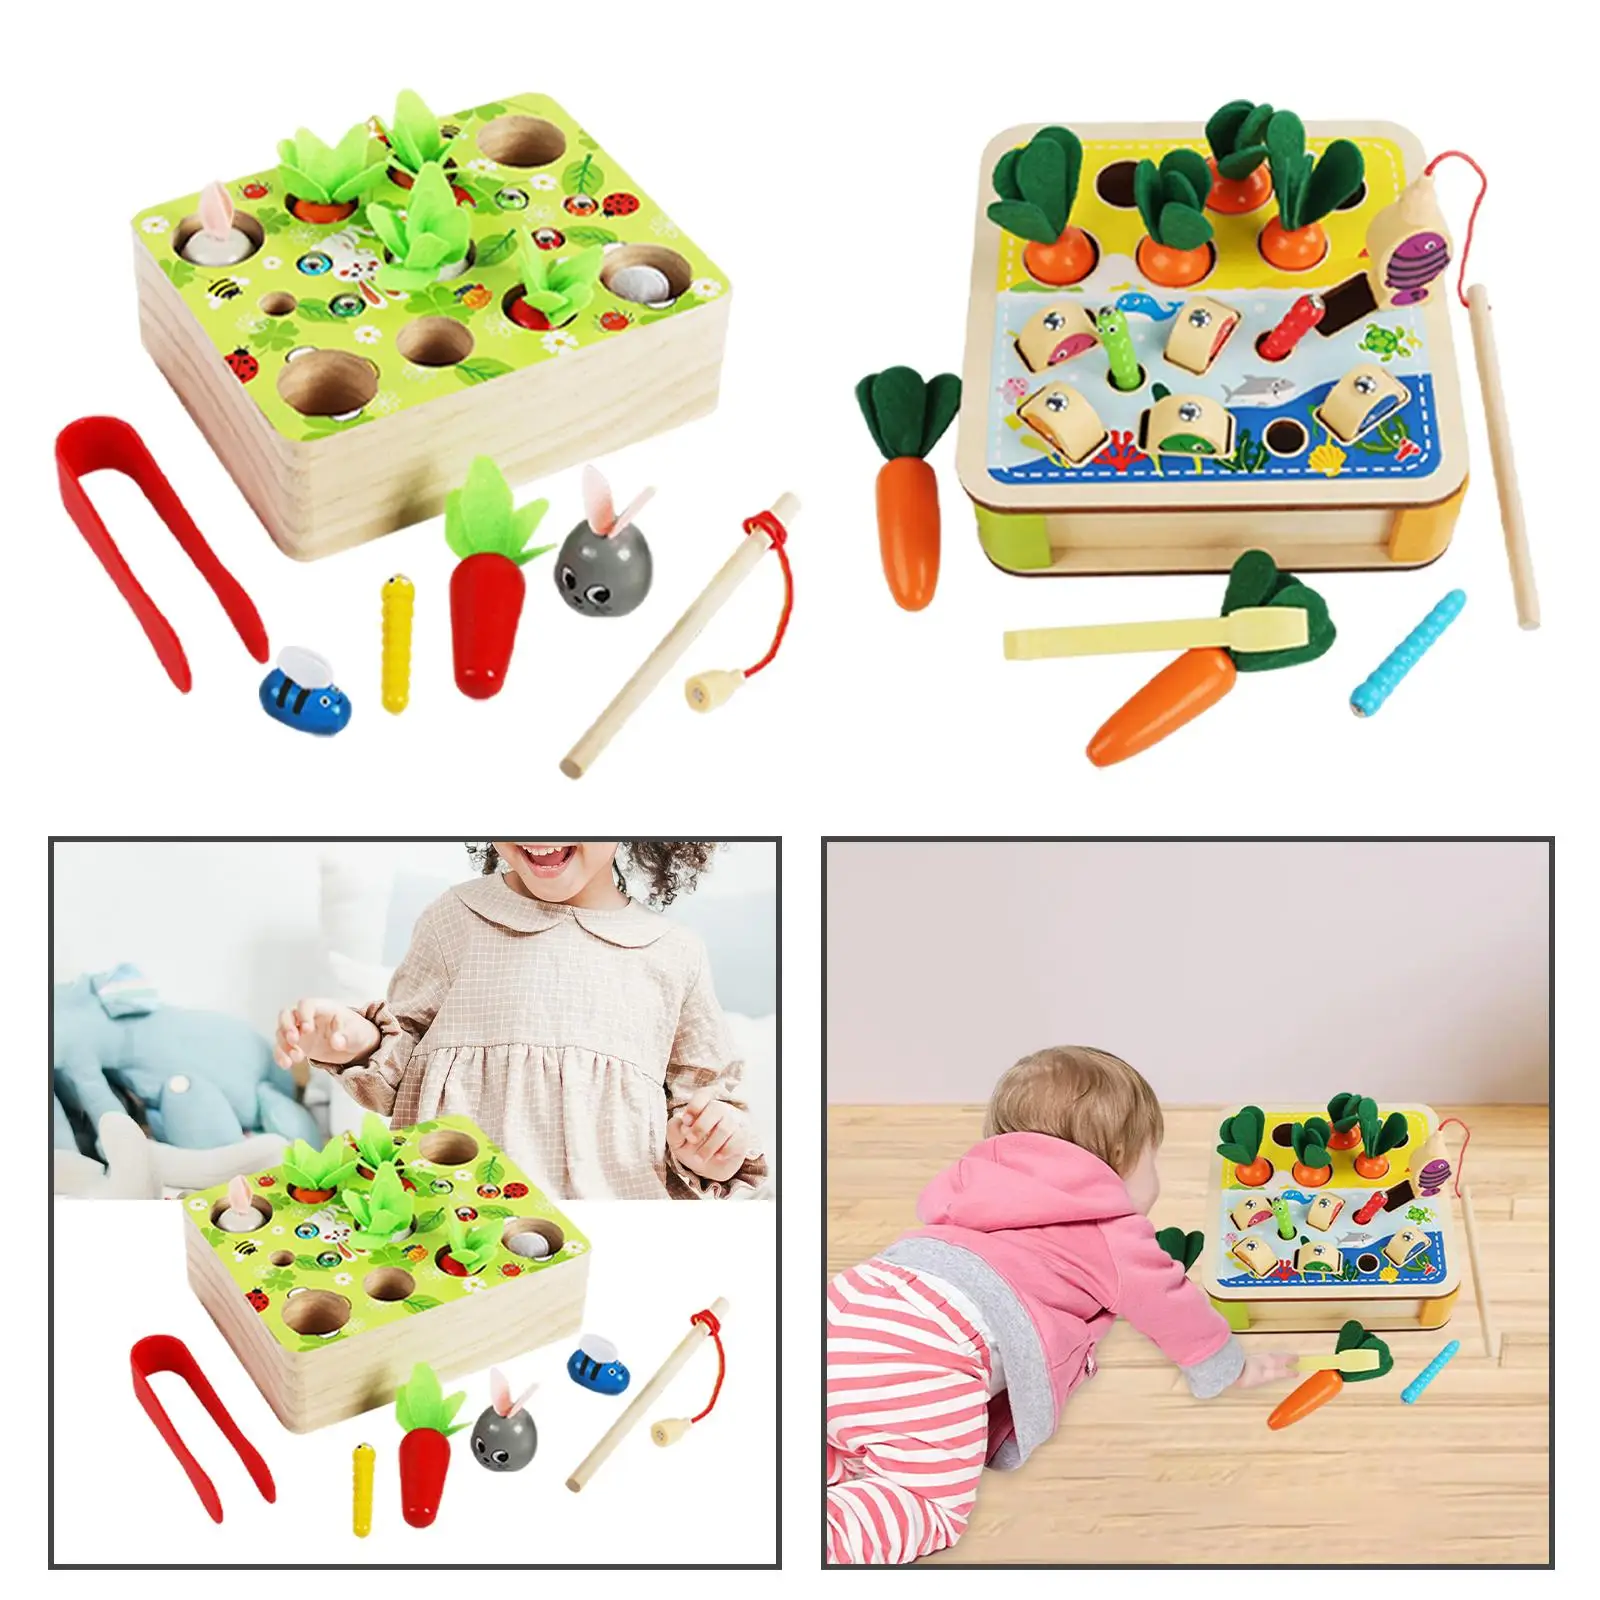 Wooden Pulling Carrot Toy Preschool Learning Toys Sorting Education for Birthday Gifts